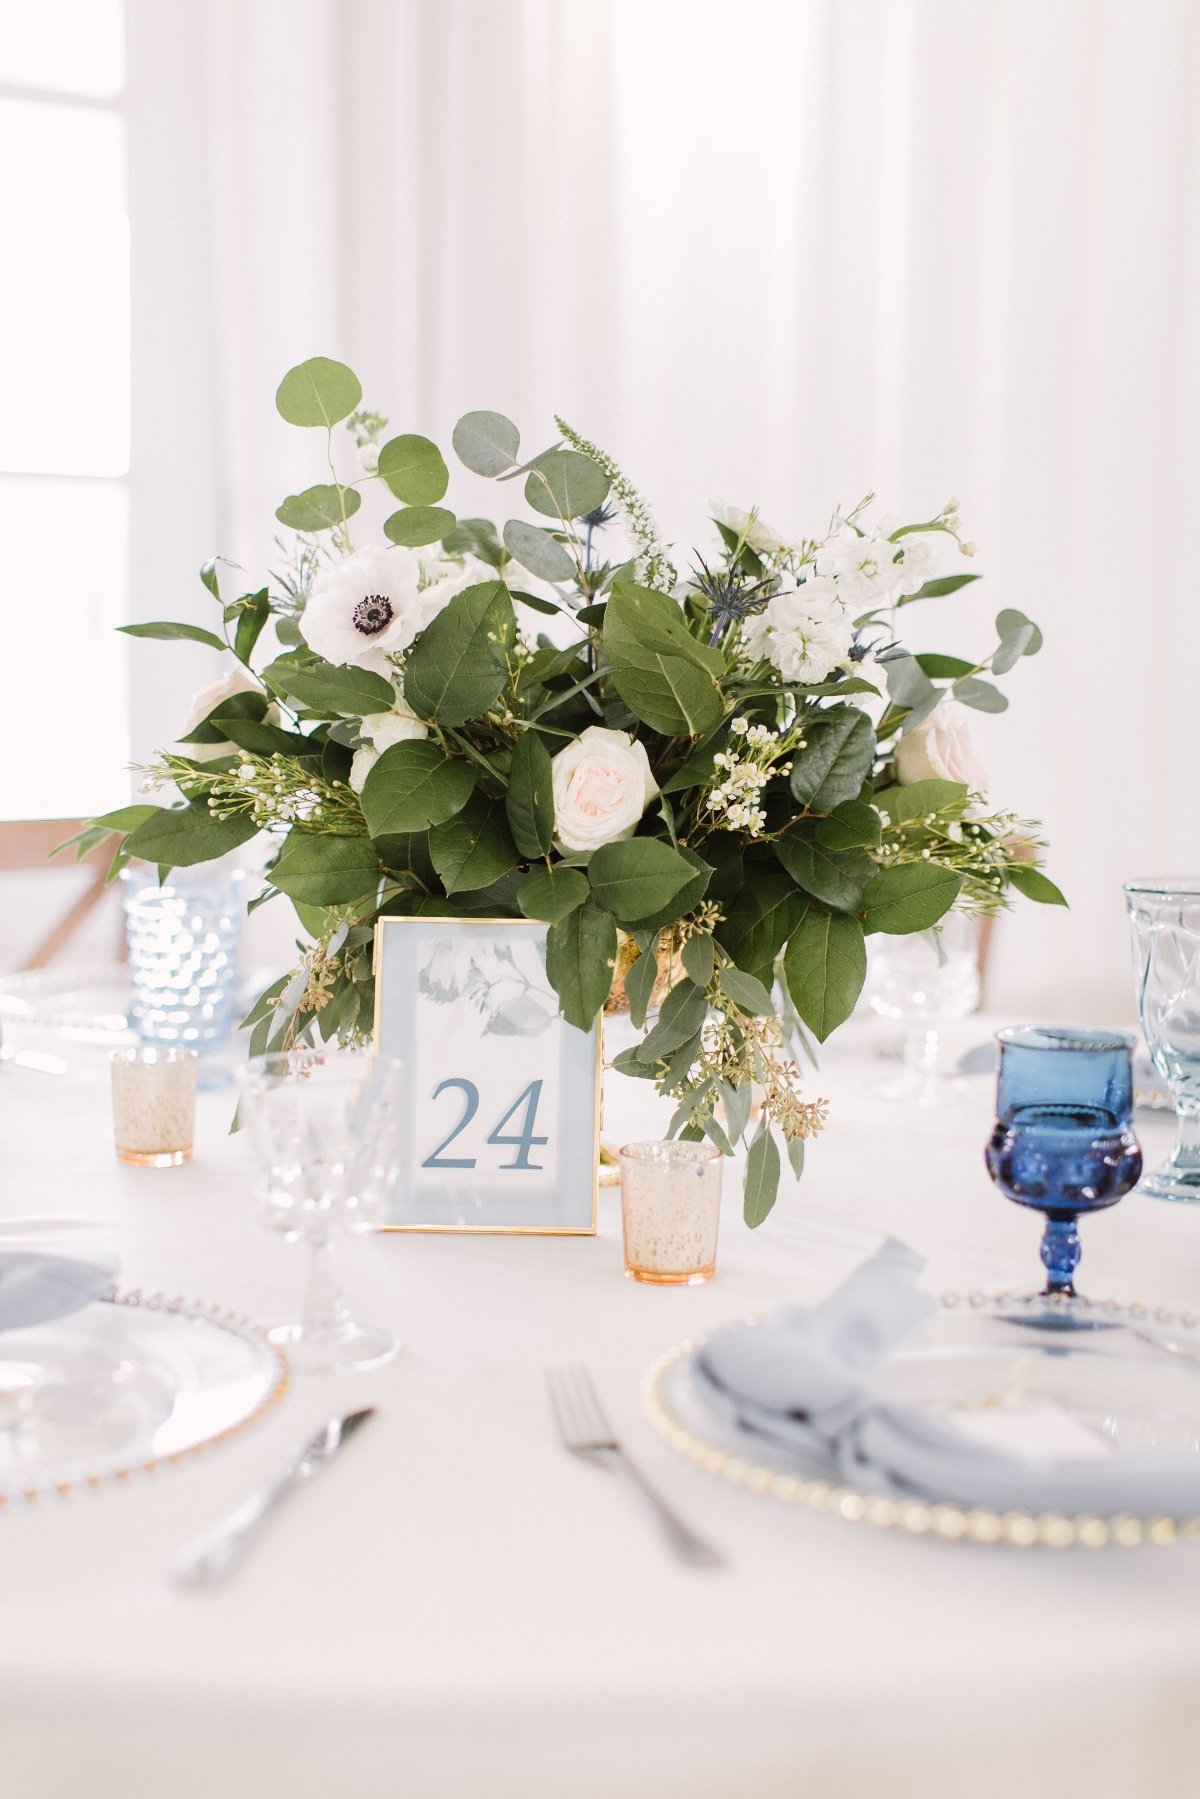 white and blue table decor with green and white floral arrangement